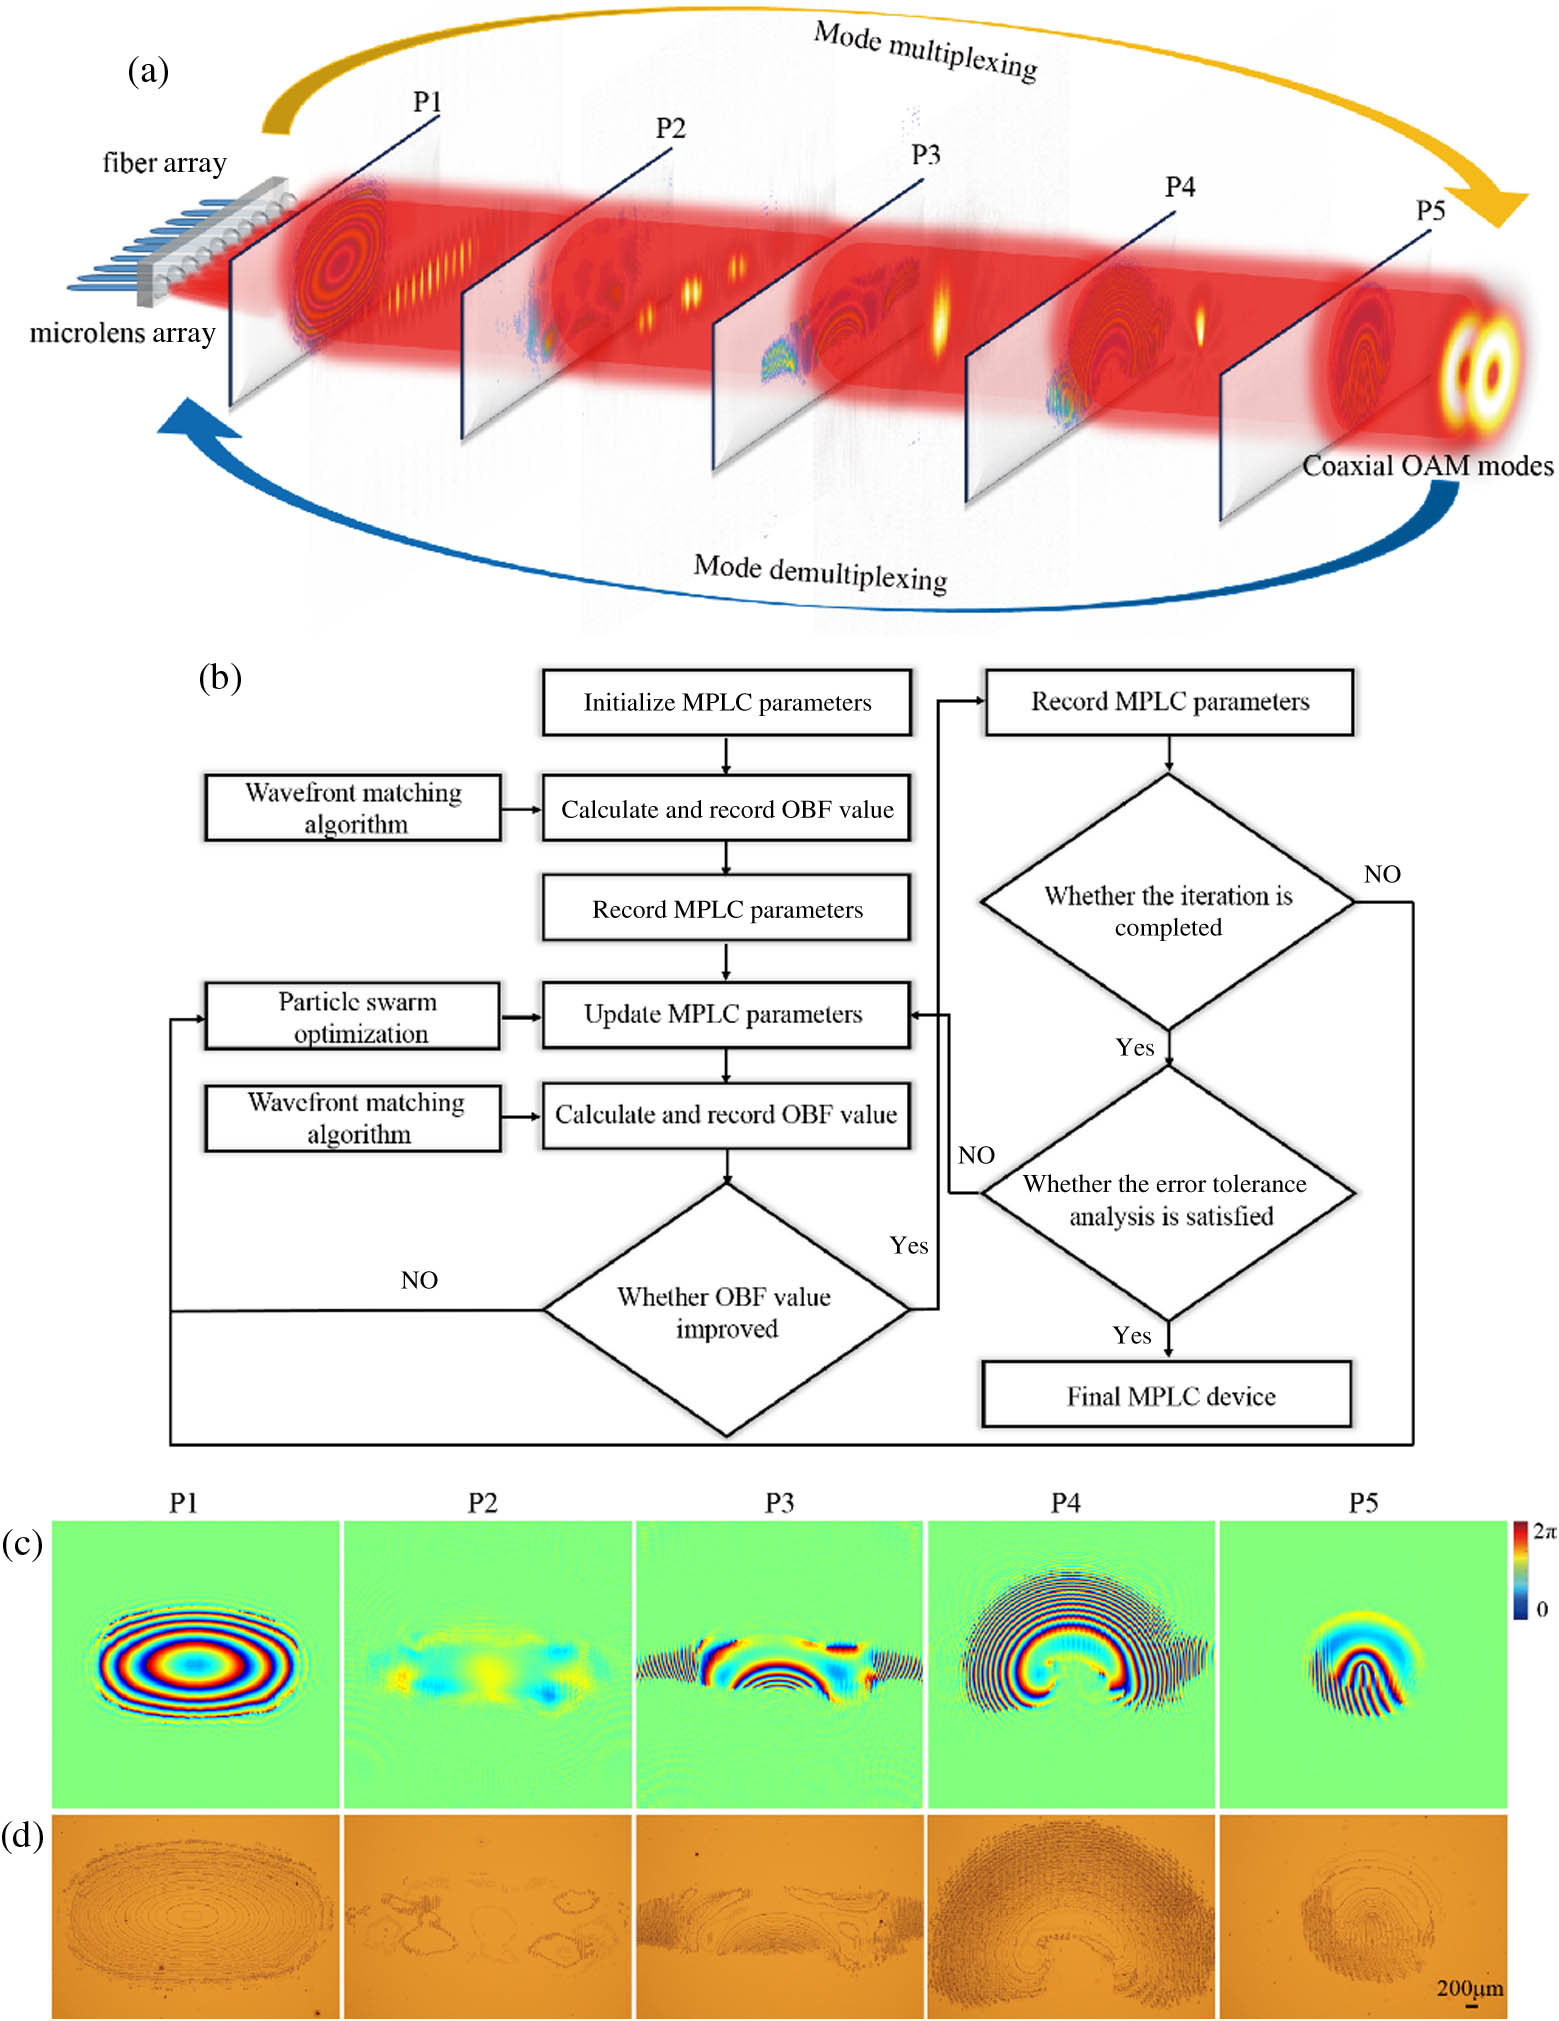 OAM mode transformation via an inversely-designed multiphase plane light conversion. (a) Multiphase planes are designed to perform reversible mode conversion between multiple axial OAM modes and a Gaussian spot array. (b) MPLC optimization flowchart; OBF, optimization objective function. (c) Phase distributions for the five designed phase planes. (d) Corresponding microscopic images of the fabricated devices.